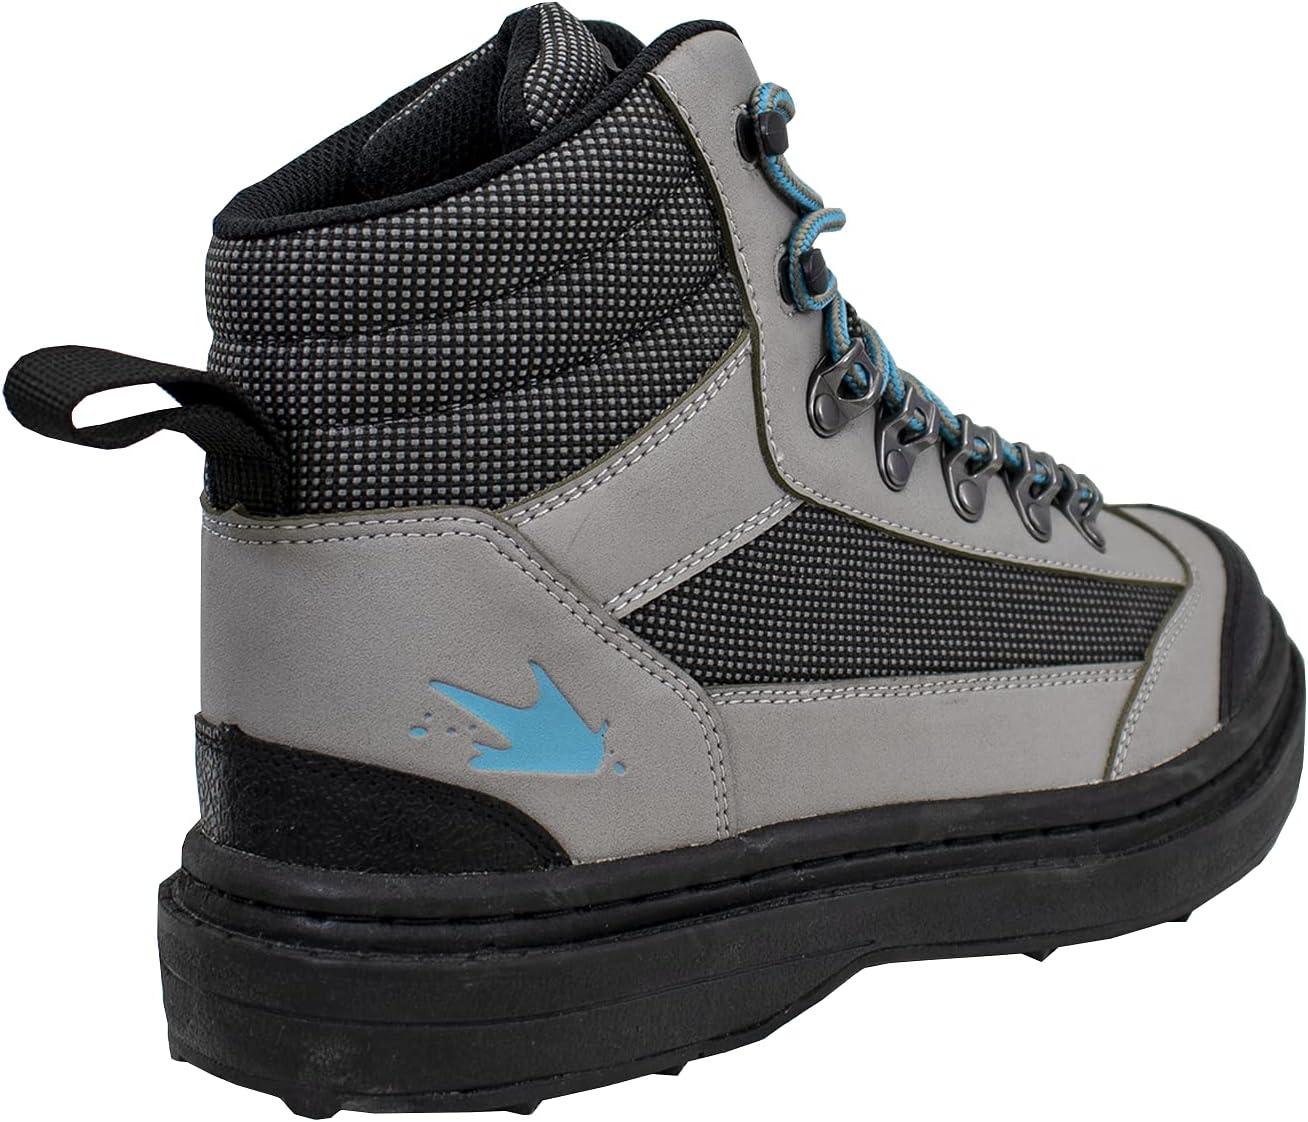 Frogg Toggs HELLBENDER Wading Boots ~ Felt Soles - The Fly Fishing